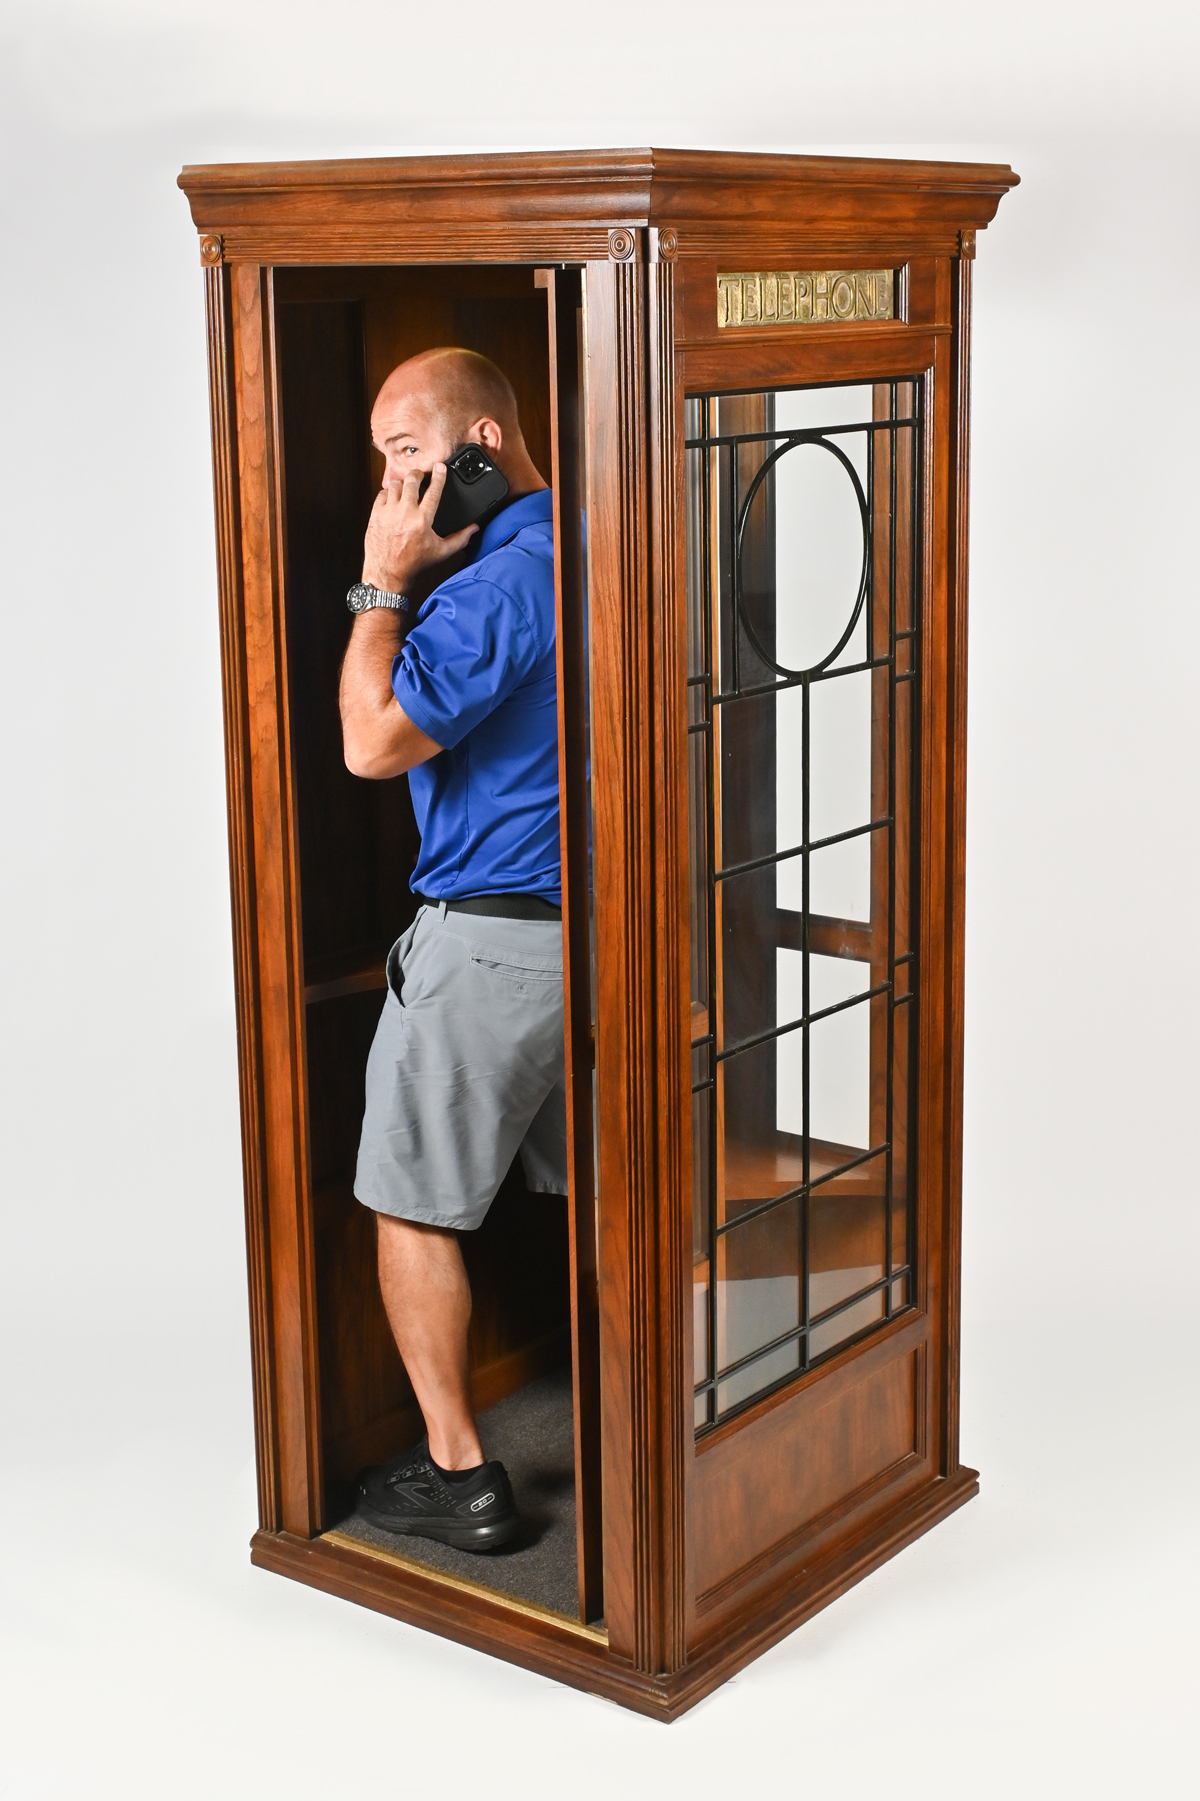 LEADED GLASS TELEPHONE BOOTH: An